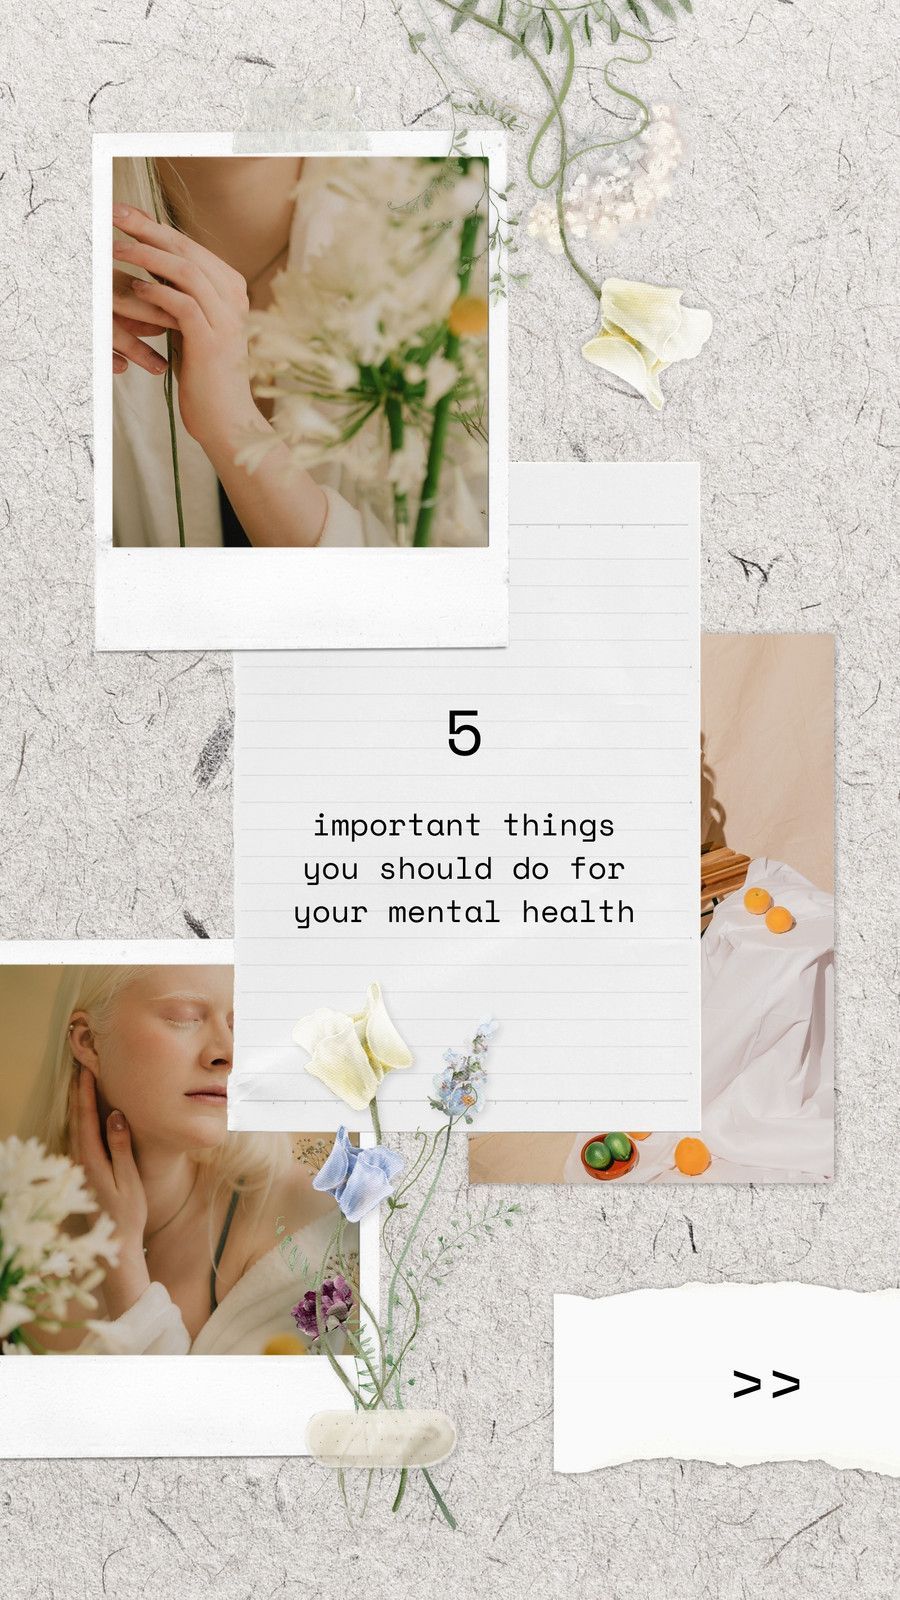 Mental health is important and it's crucial to take care of it. Here are 5 things you should do for your mental health. - Mental health